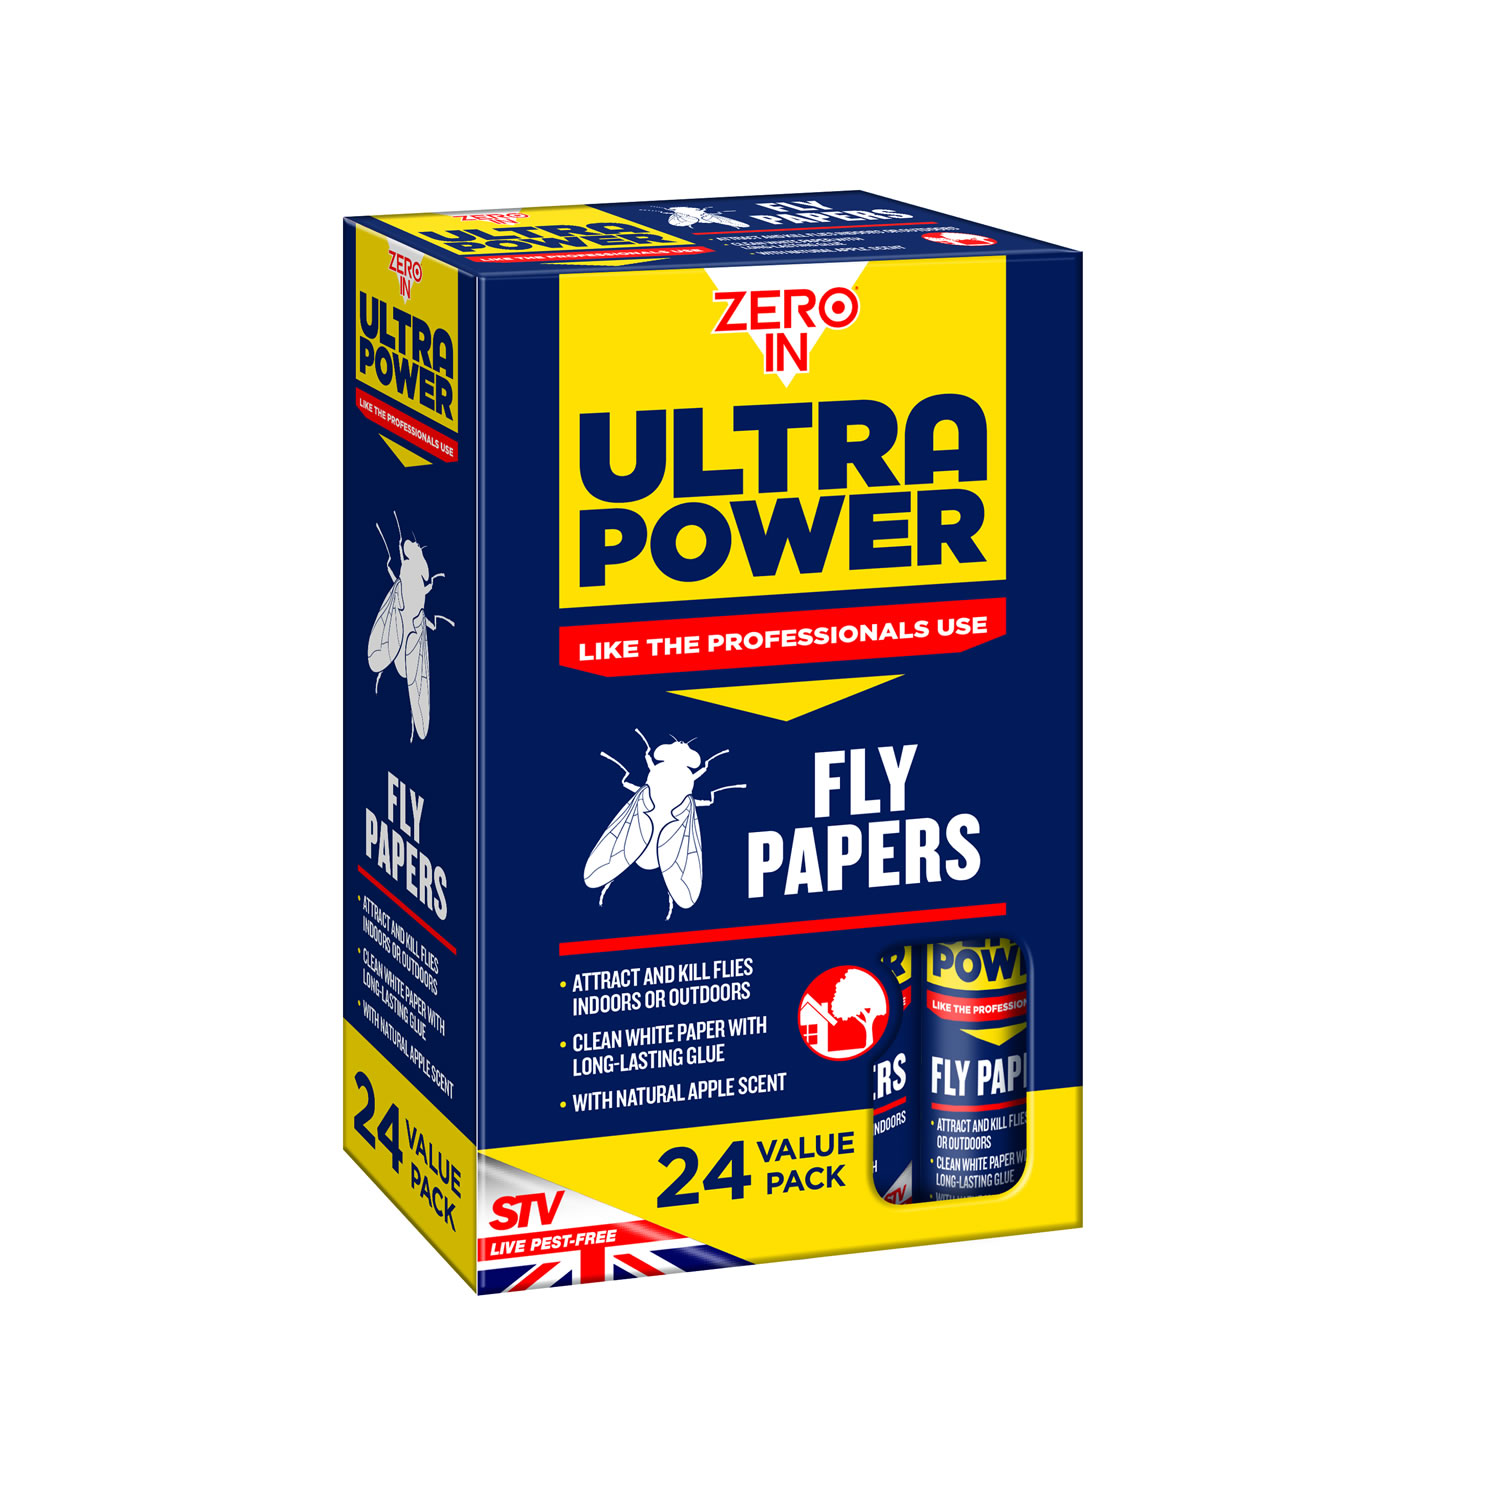 ZERO IN ULTRA POWER FLY PAPERS 24 PACK